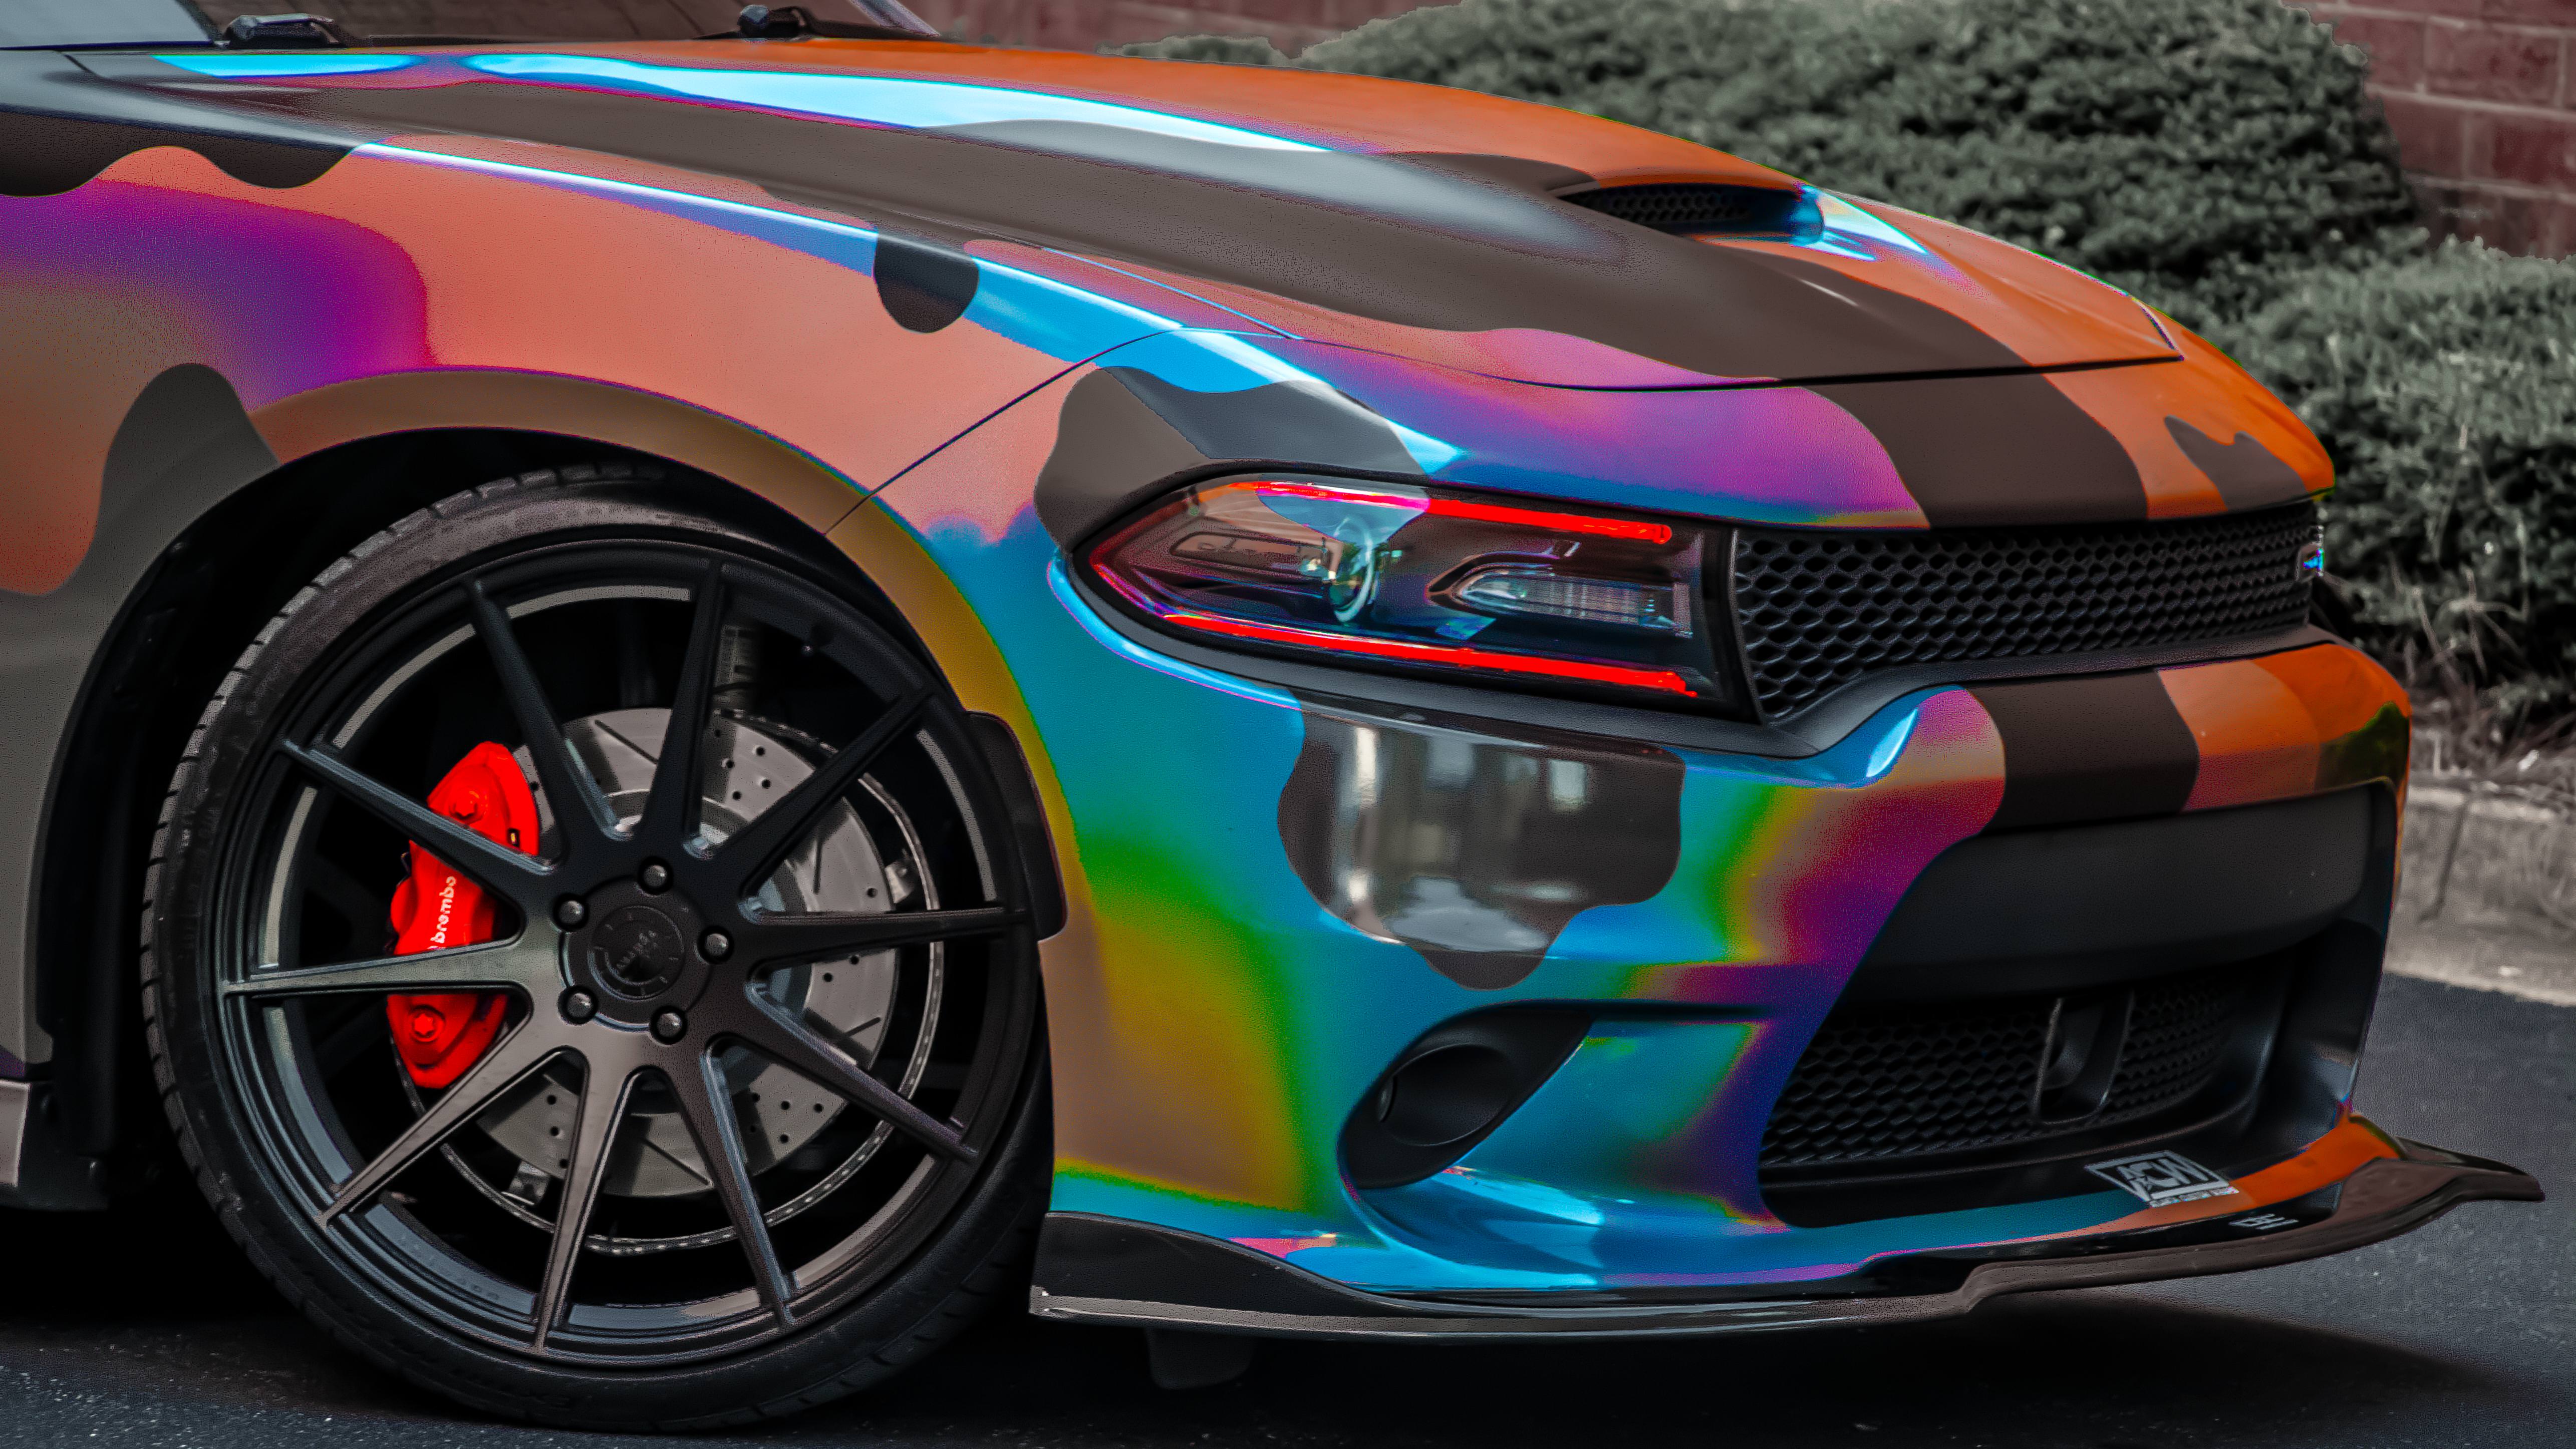 Holographic Camo Wrapped Dodge Charger Scatpack Wallpaper - Wrapped Charger Scat Pack - HD Wallpaper 